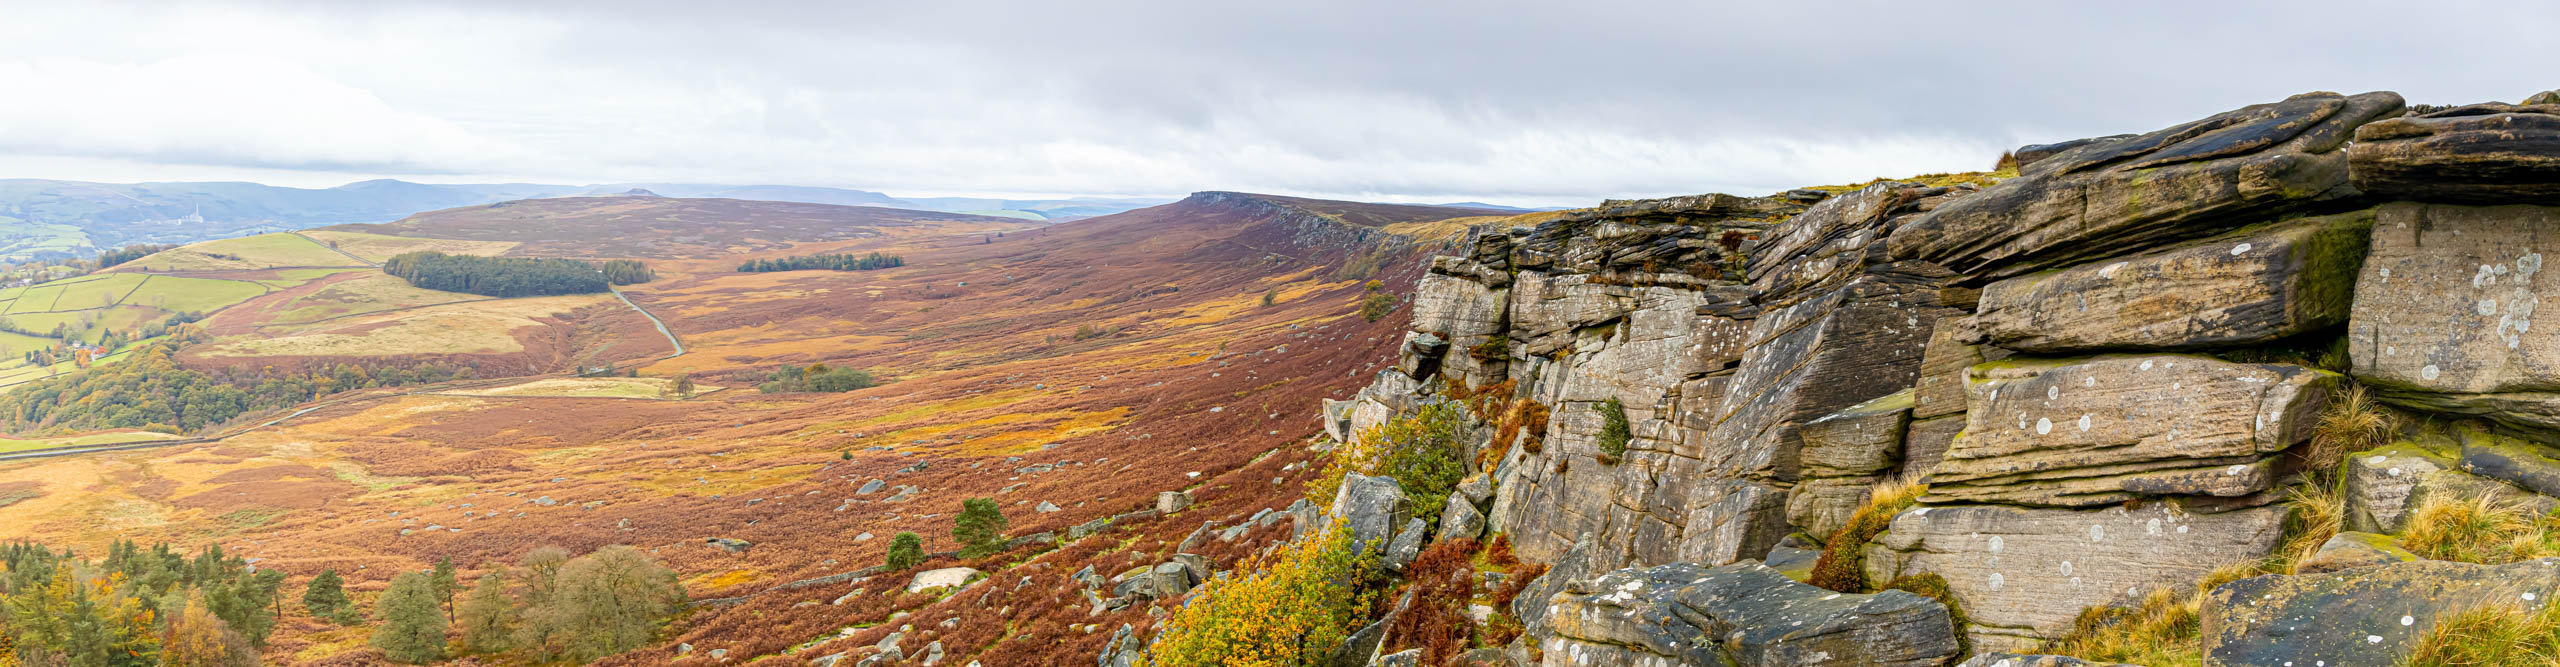 View of Stanage Edge in Peak district, an upland area in England at the southern end of the Pennines